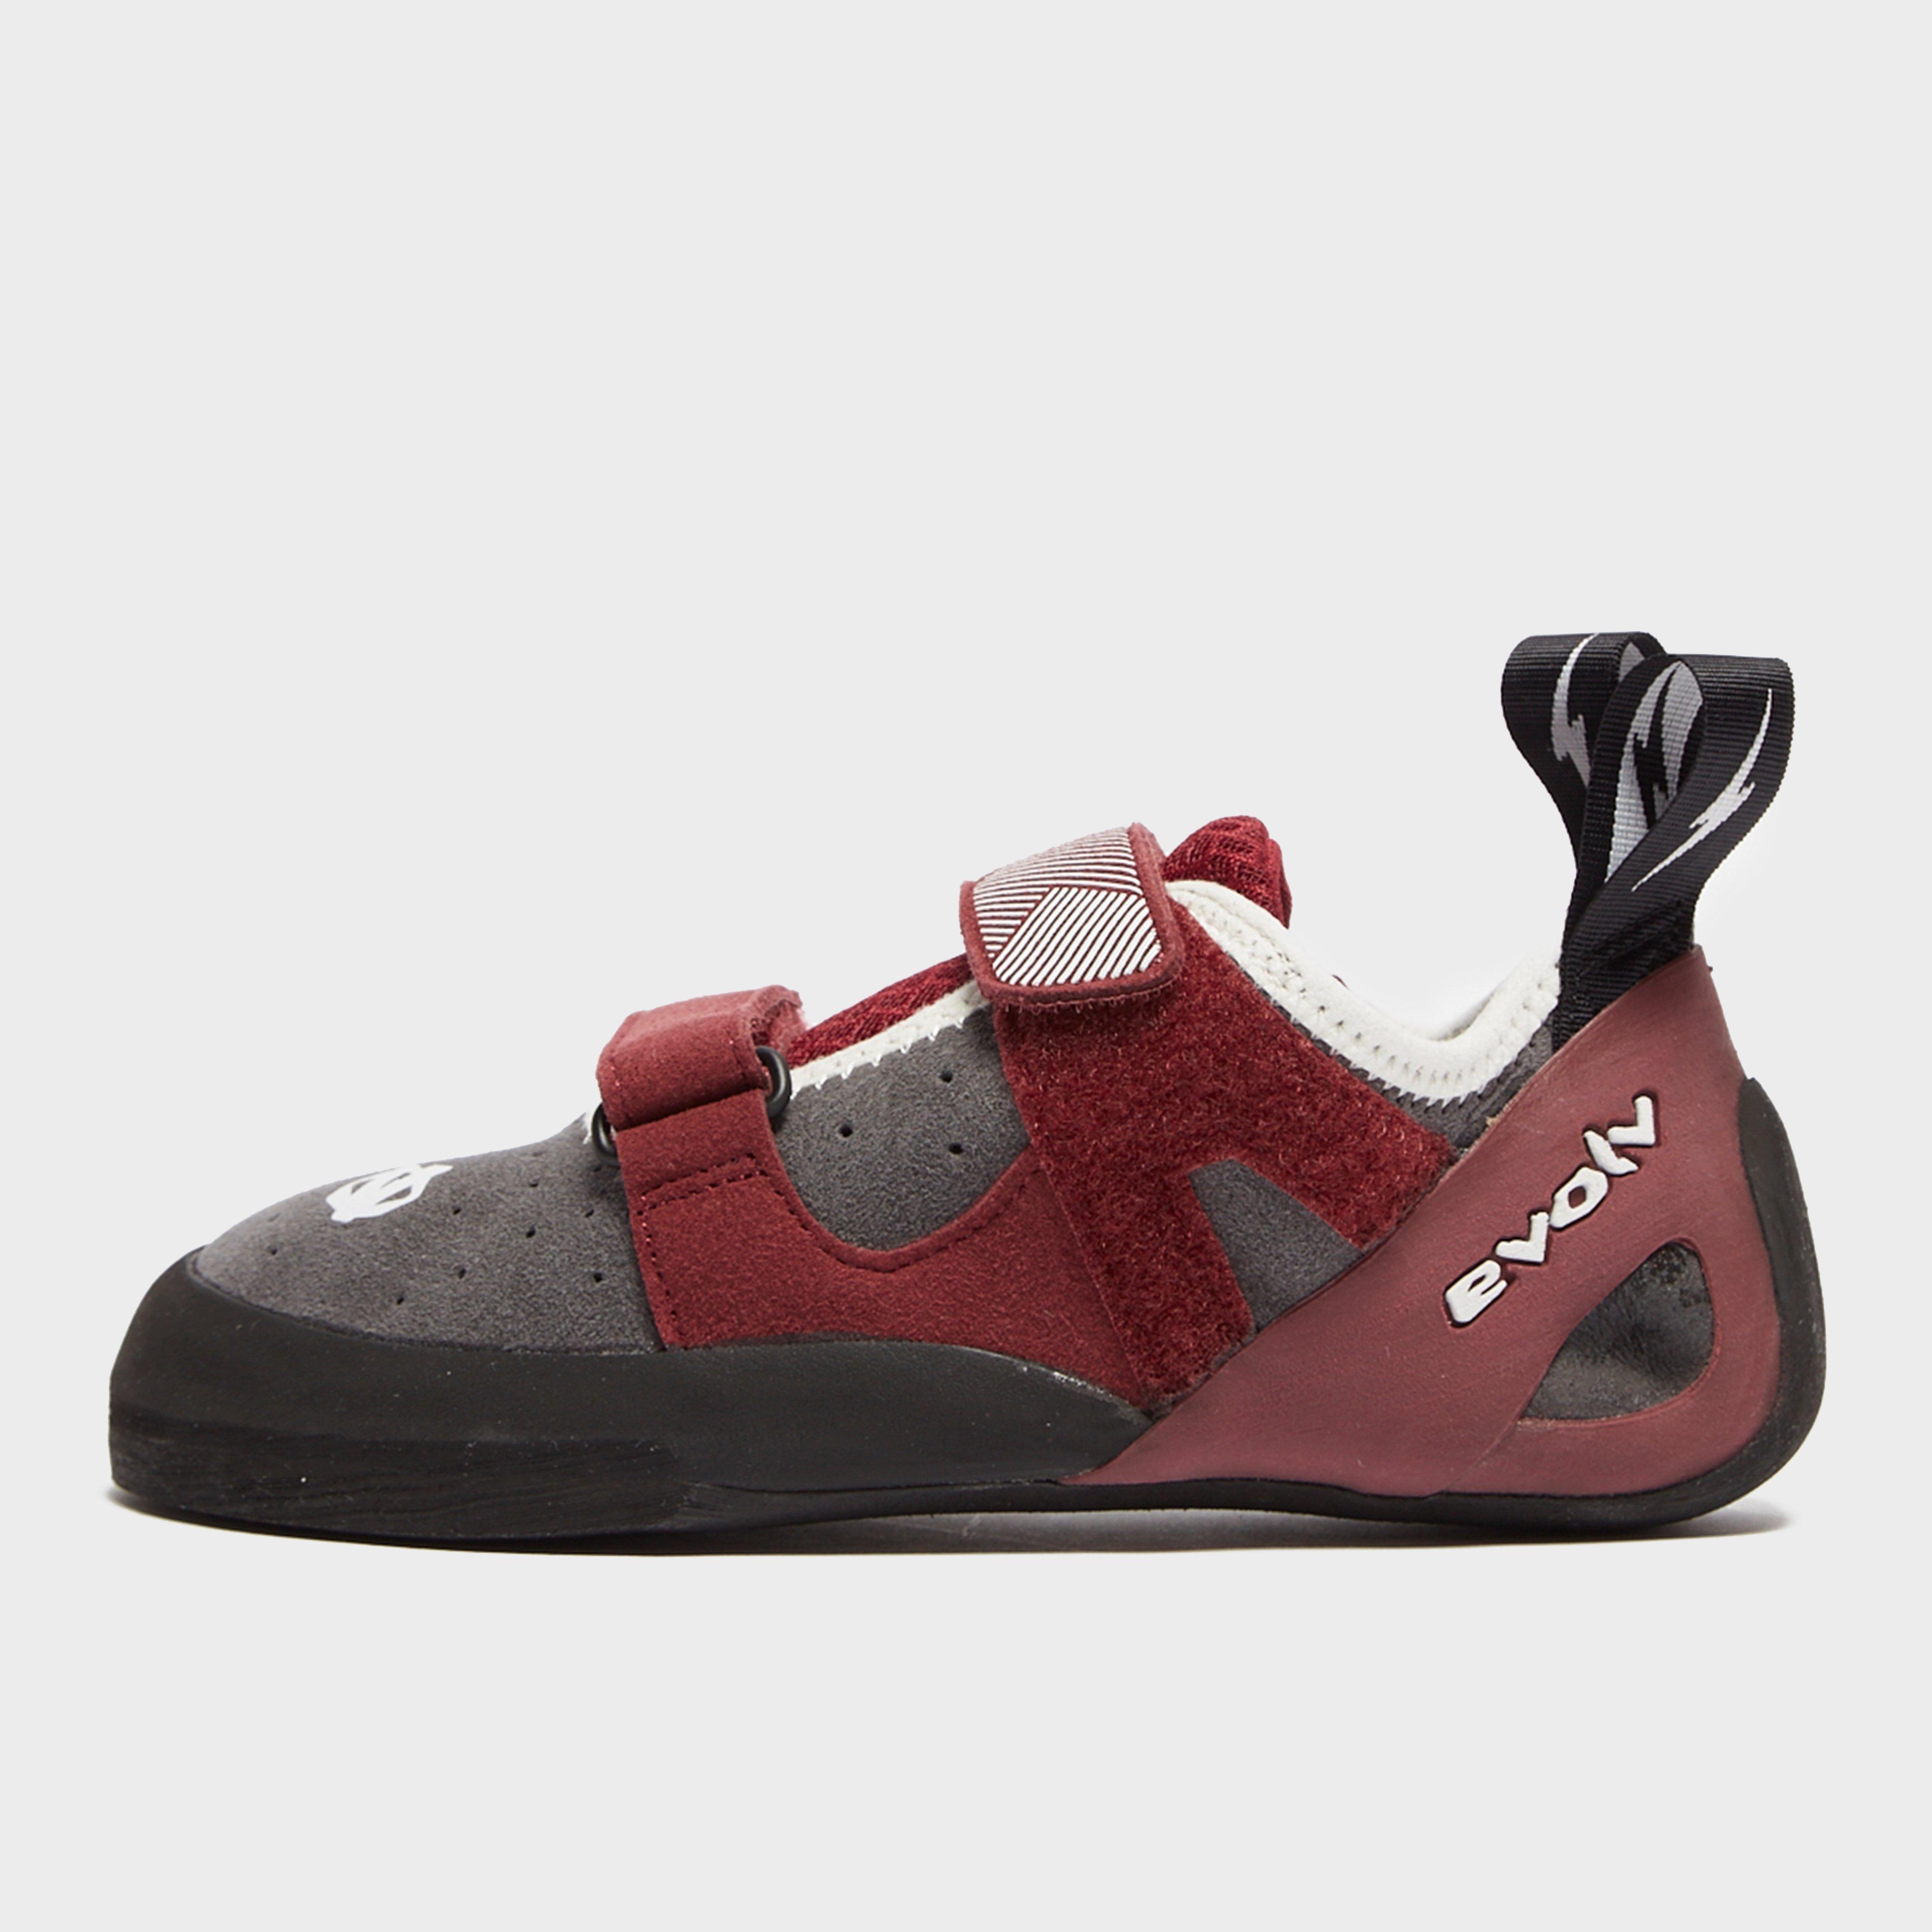 Evolv Elektra Climbing Shoes - Red/gry  Red/gry